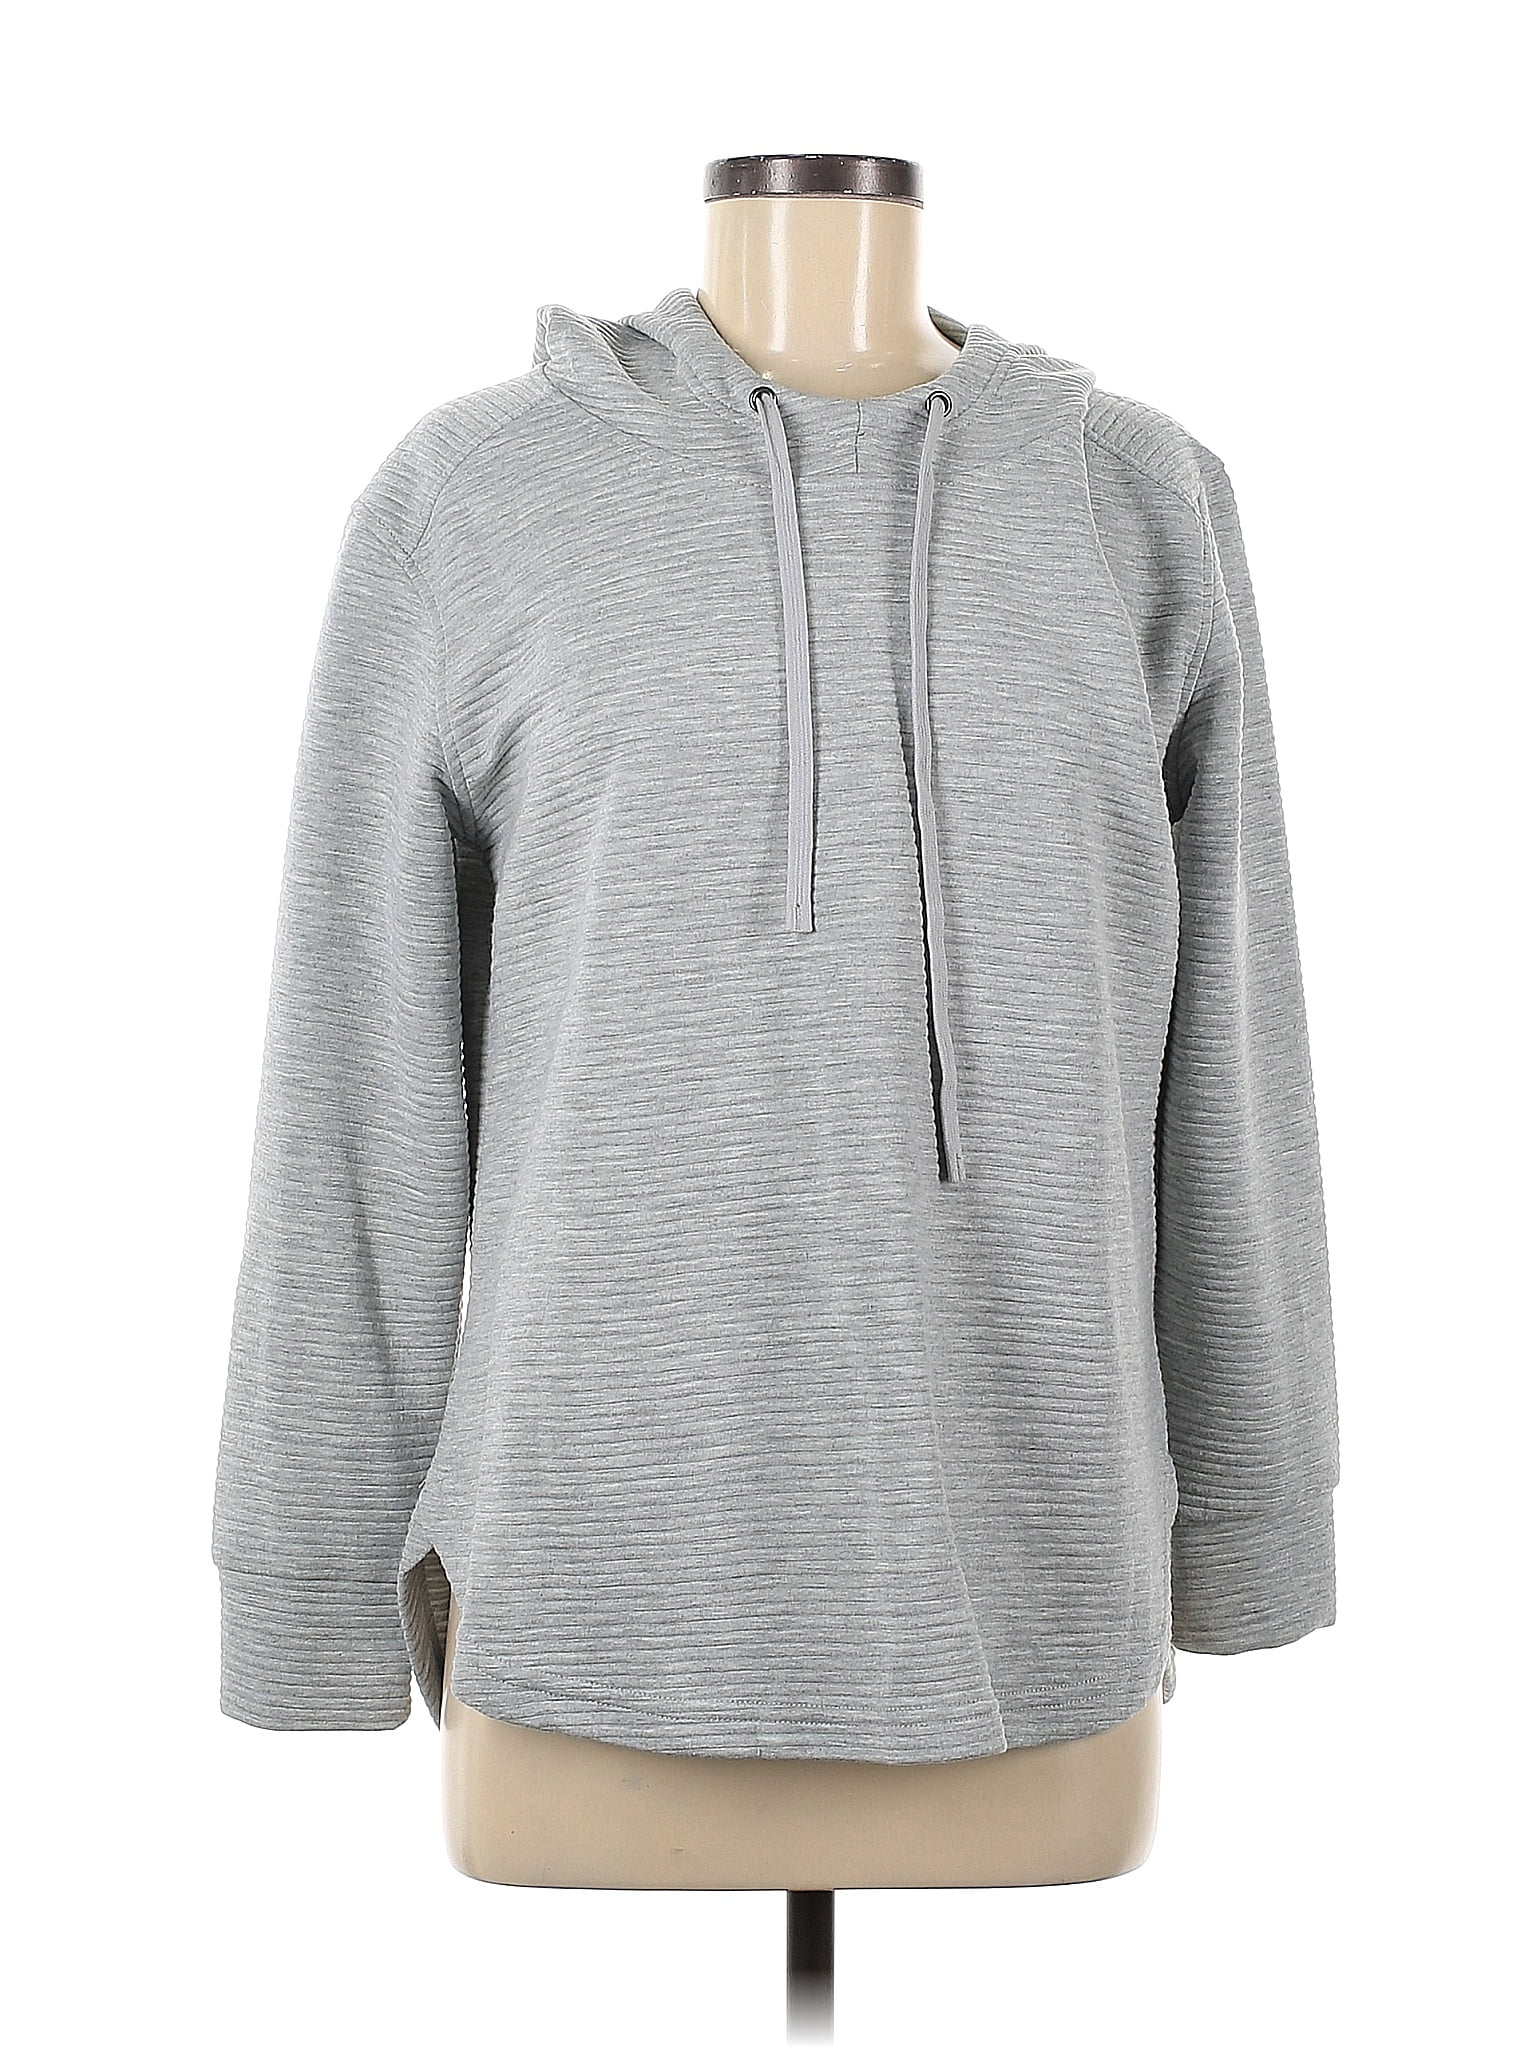 Jane and Delancey Gray Pullover Hoodie Size M - 62% off | thredUP